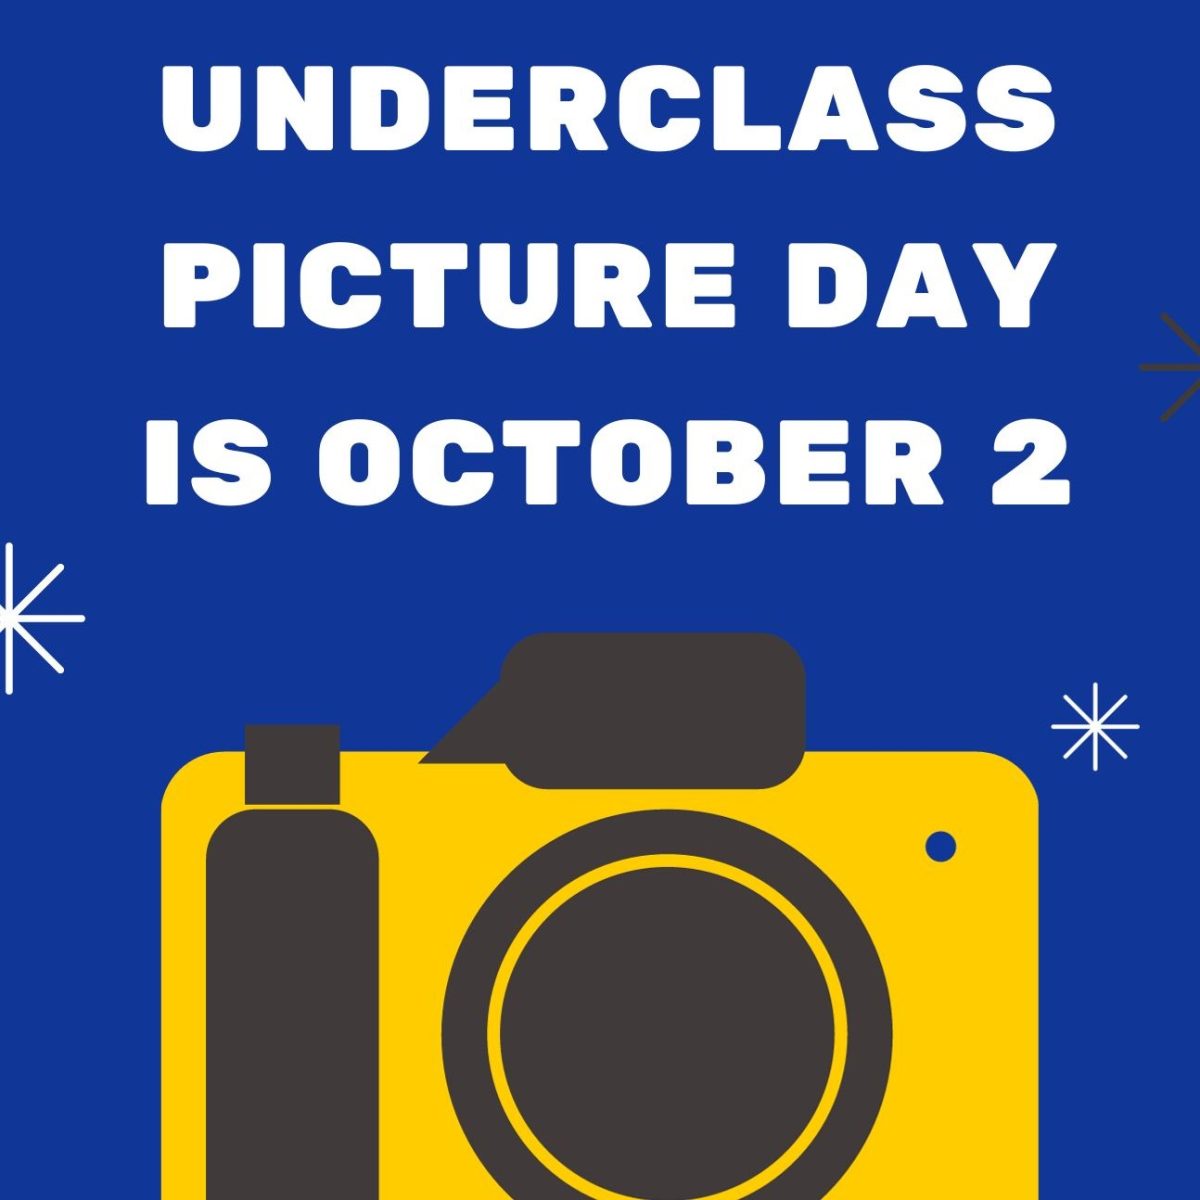 Underclass Picture Day is October 2